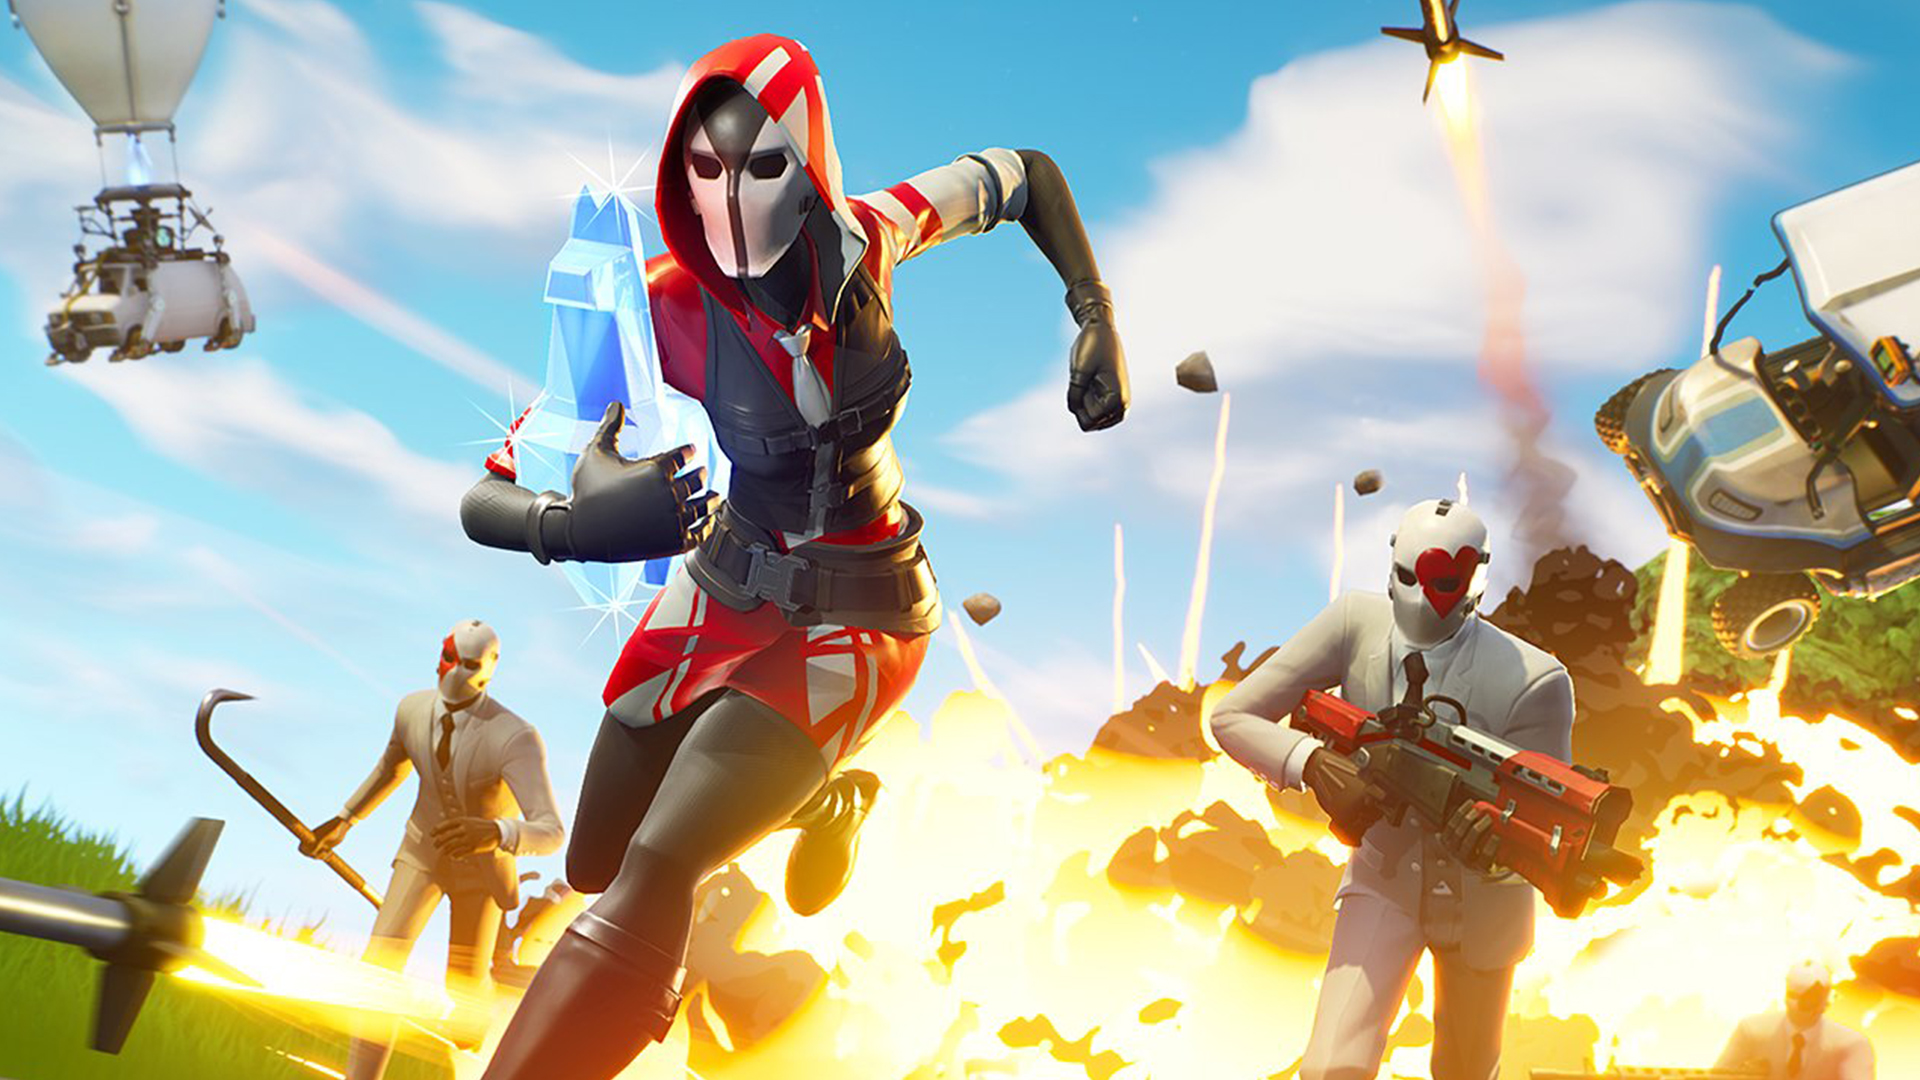 Fortnite Capture the Flag is coming, according to leaks | PCGamesN